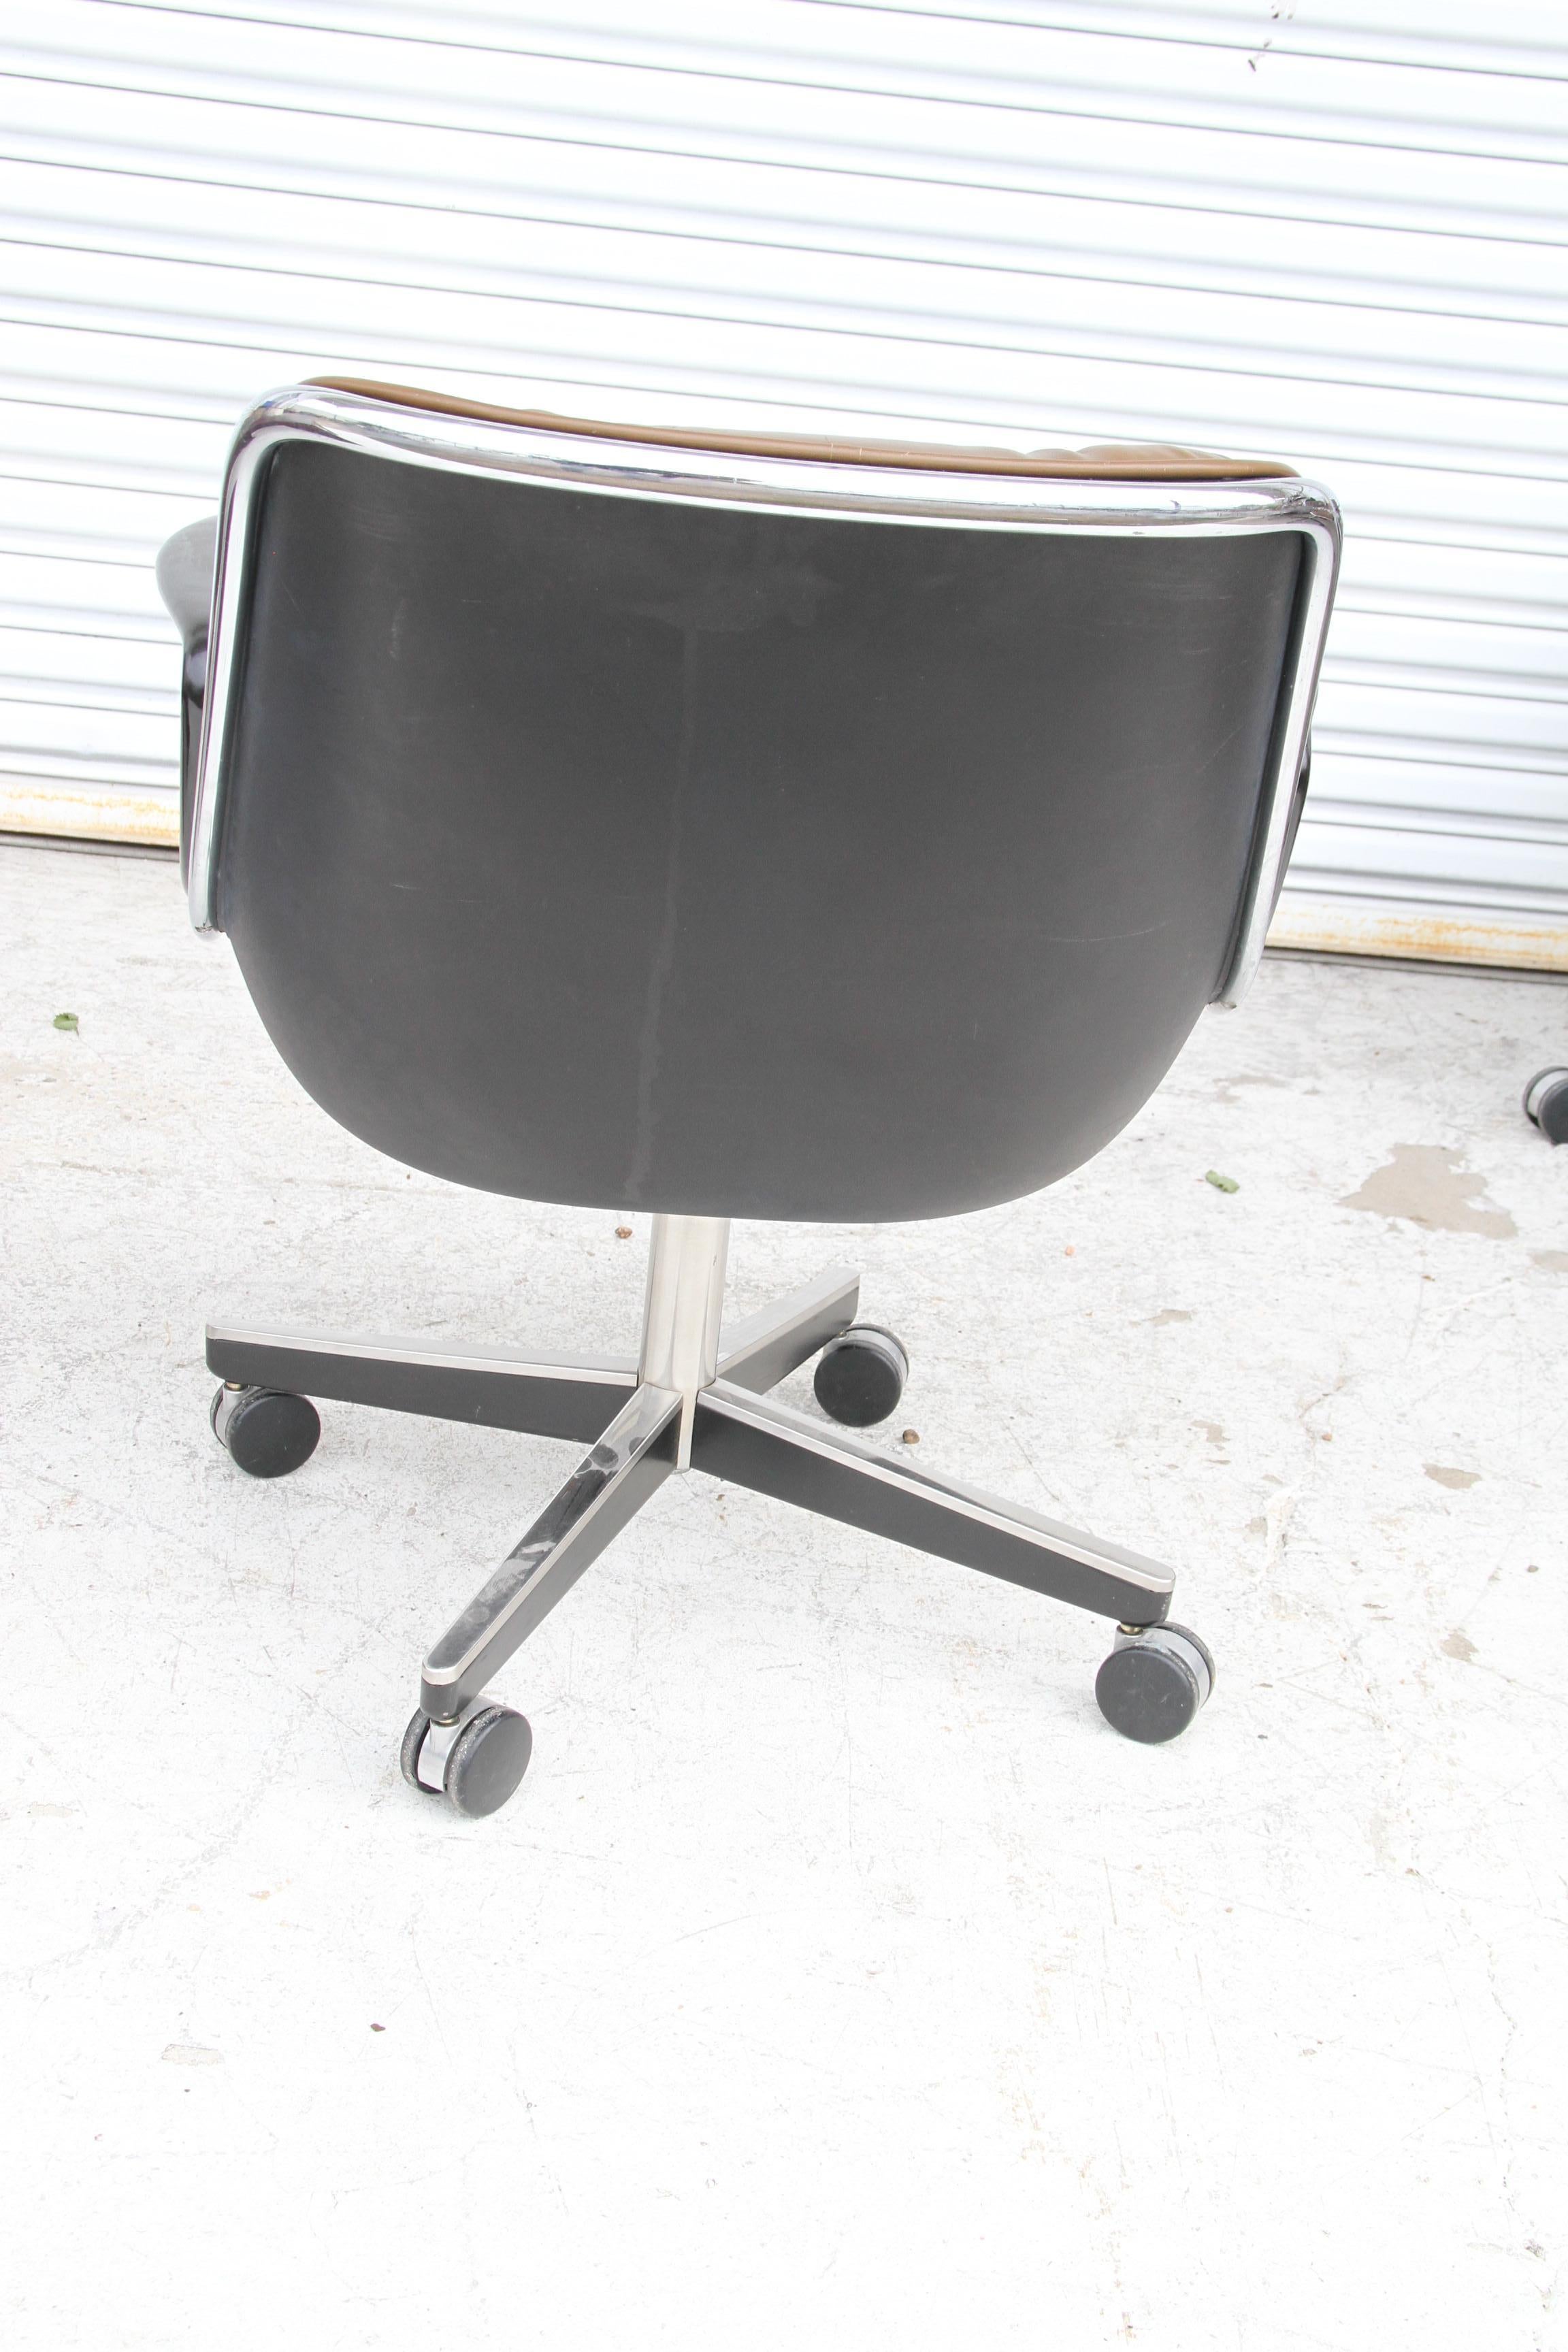 20th Century 1 Charles Pollock for Knoll Executive Chairs (4 Available)